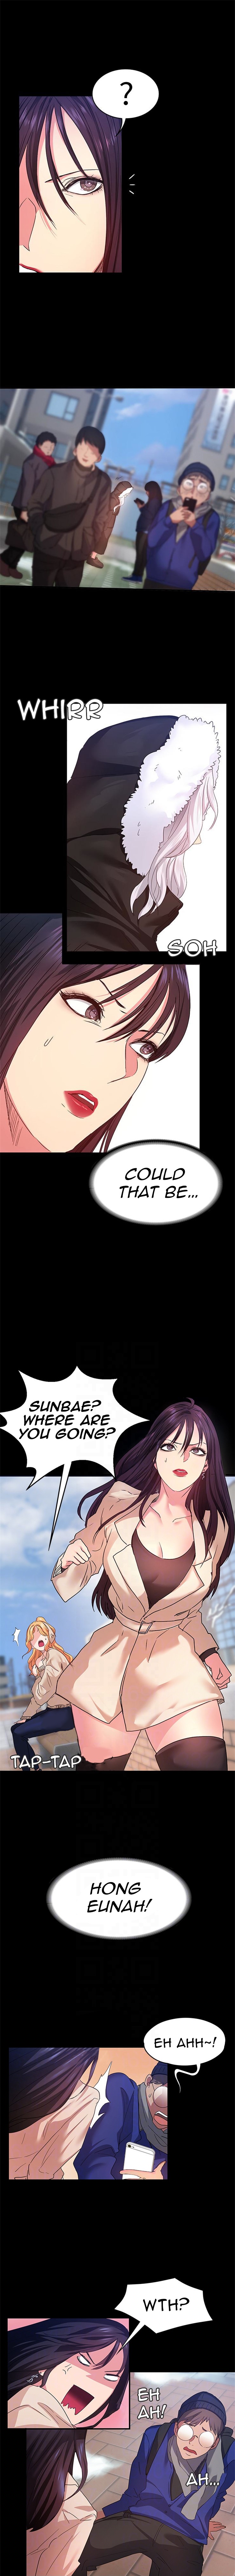 Returning Girlfriend - Chapter 7 Page 11